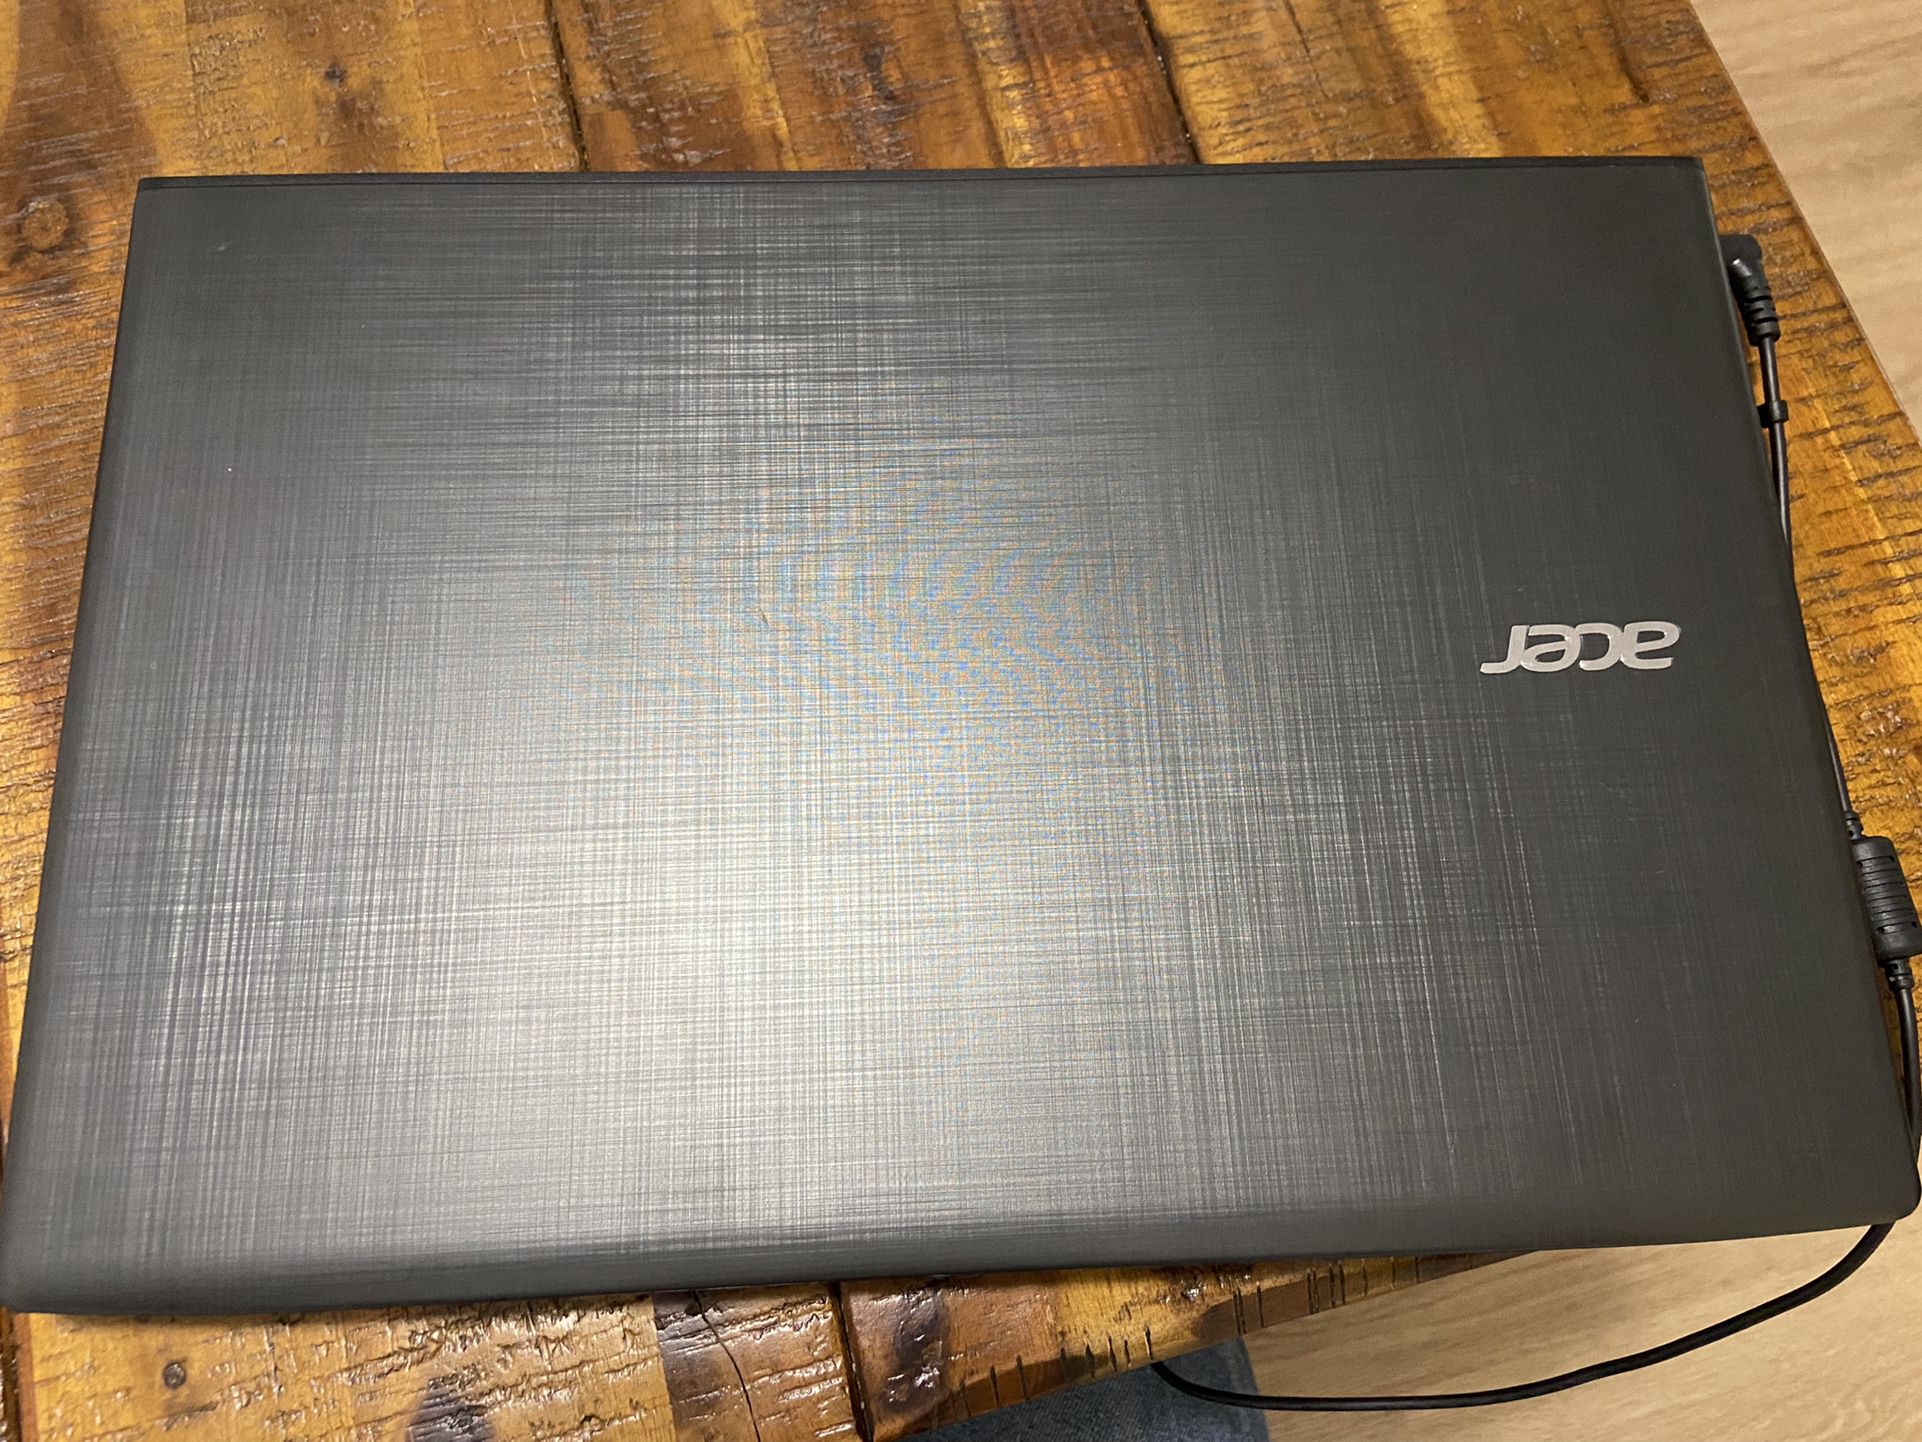 Acer Laptop Nearly New